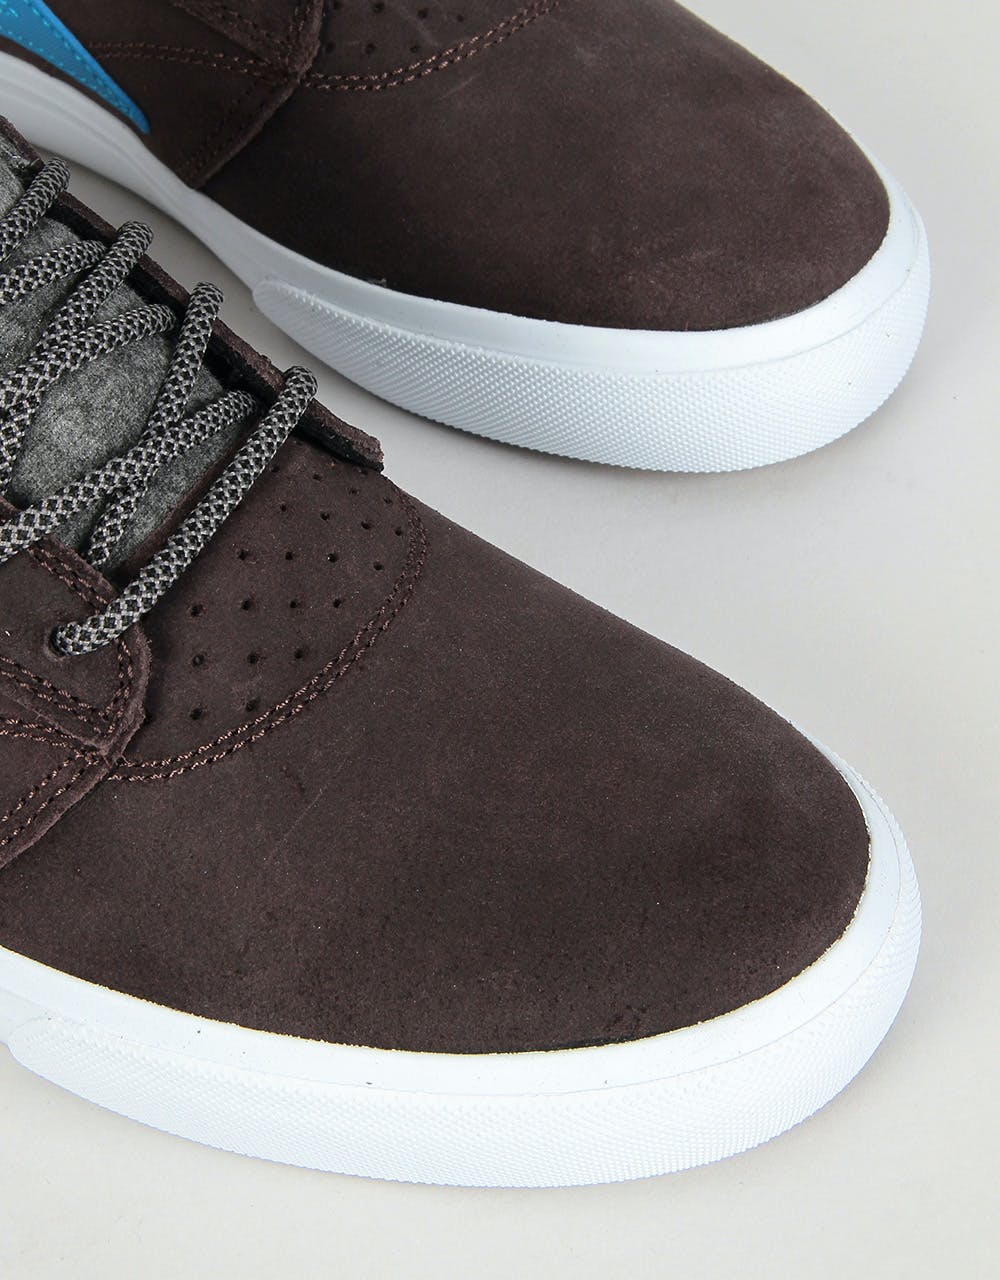 Lakai Griffin WT Skate Shoes - Brown Oiled Suede